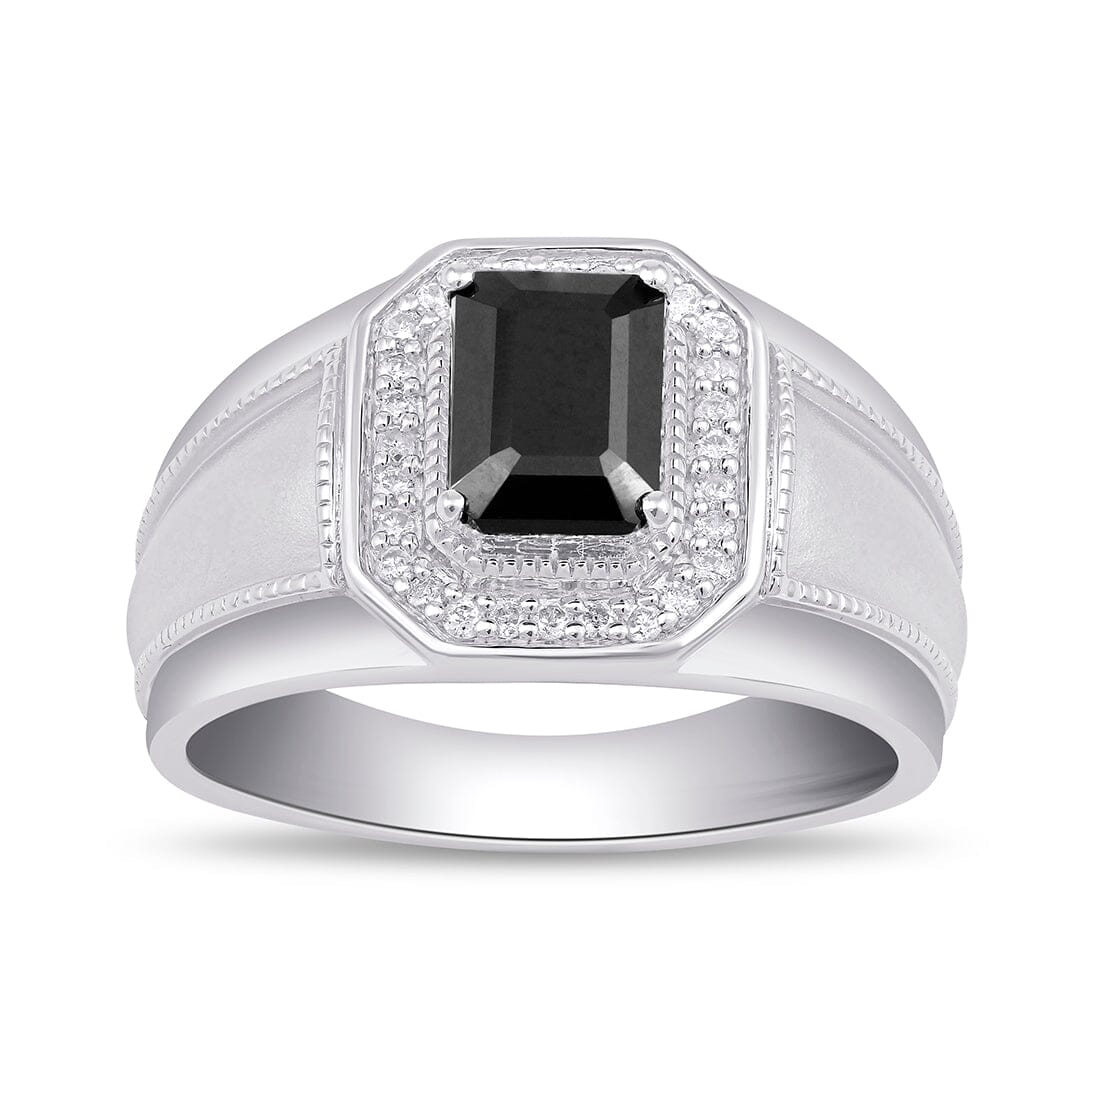 Stanton Made For Men Emerald Cut Onyx Ring with 1/5ct of Diamonds in Sterling Silver Rings Bevilles 